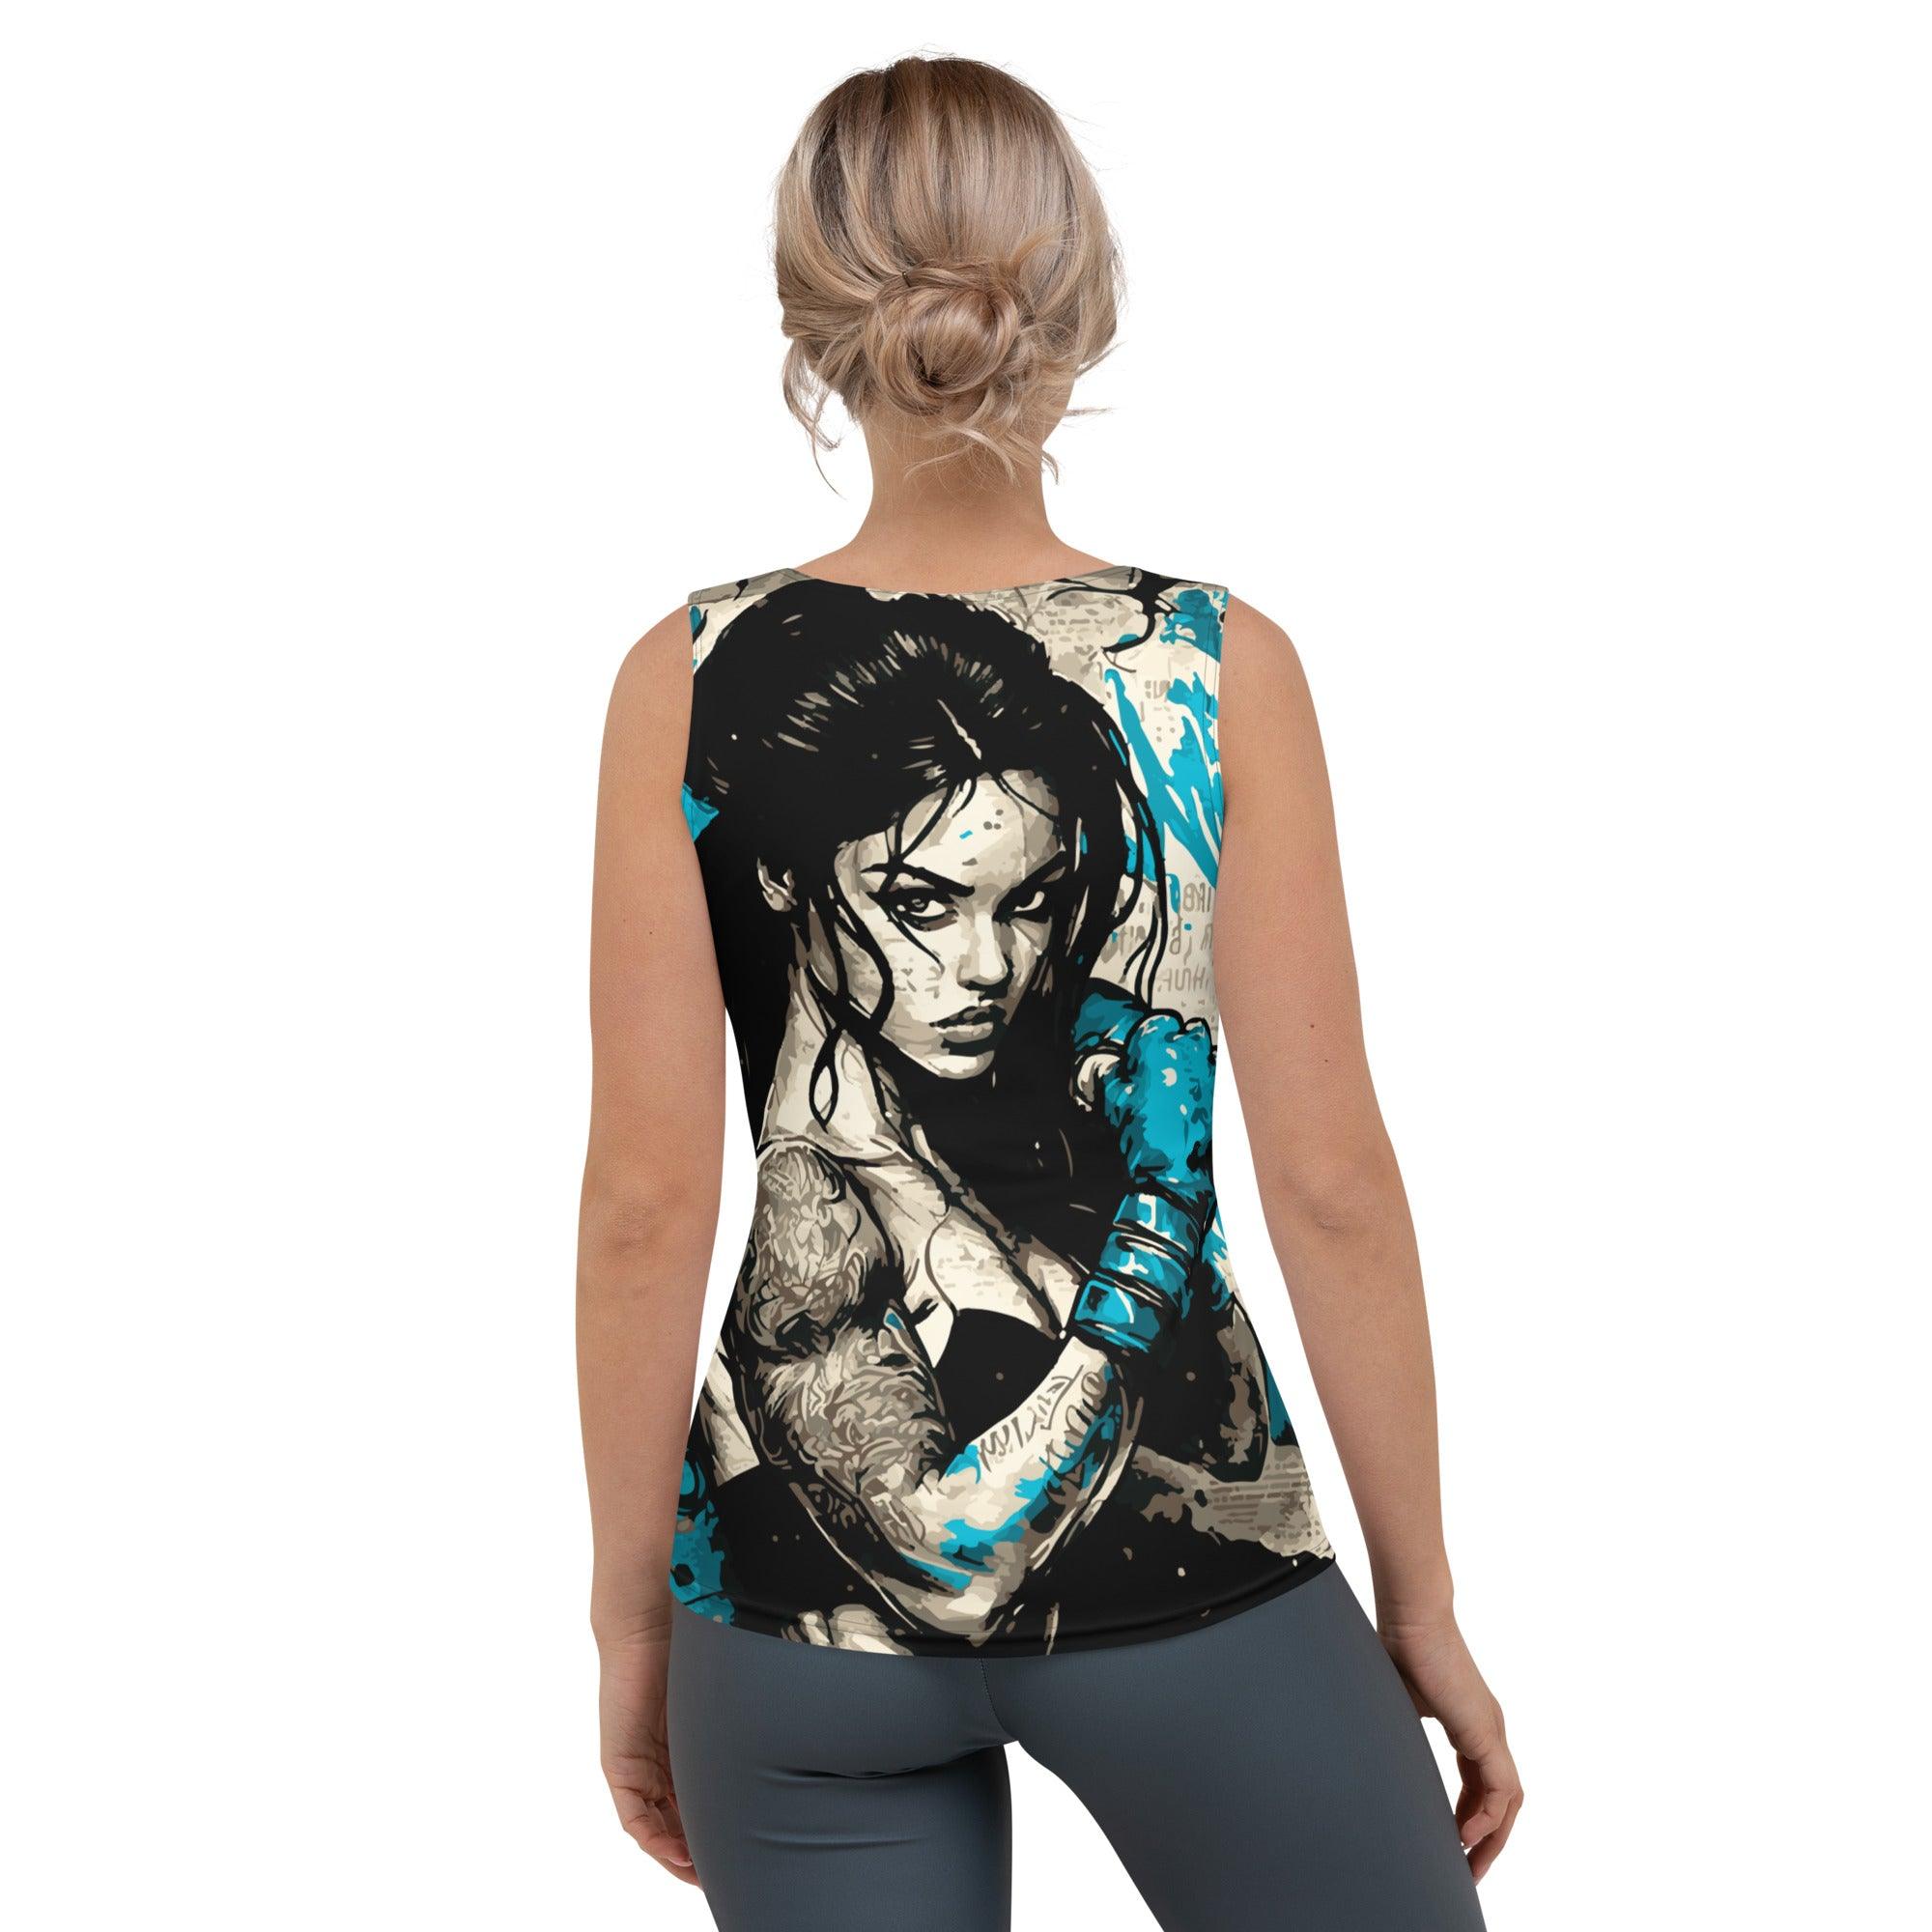 Stay Focused Sublimation Cut & Sew Tank Top - Beyond T-shirts